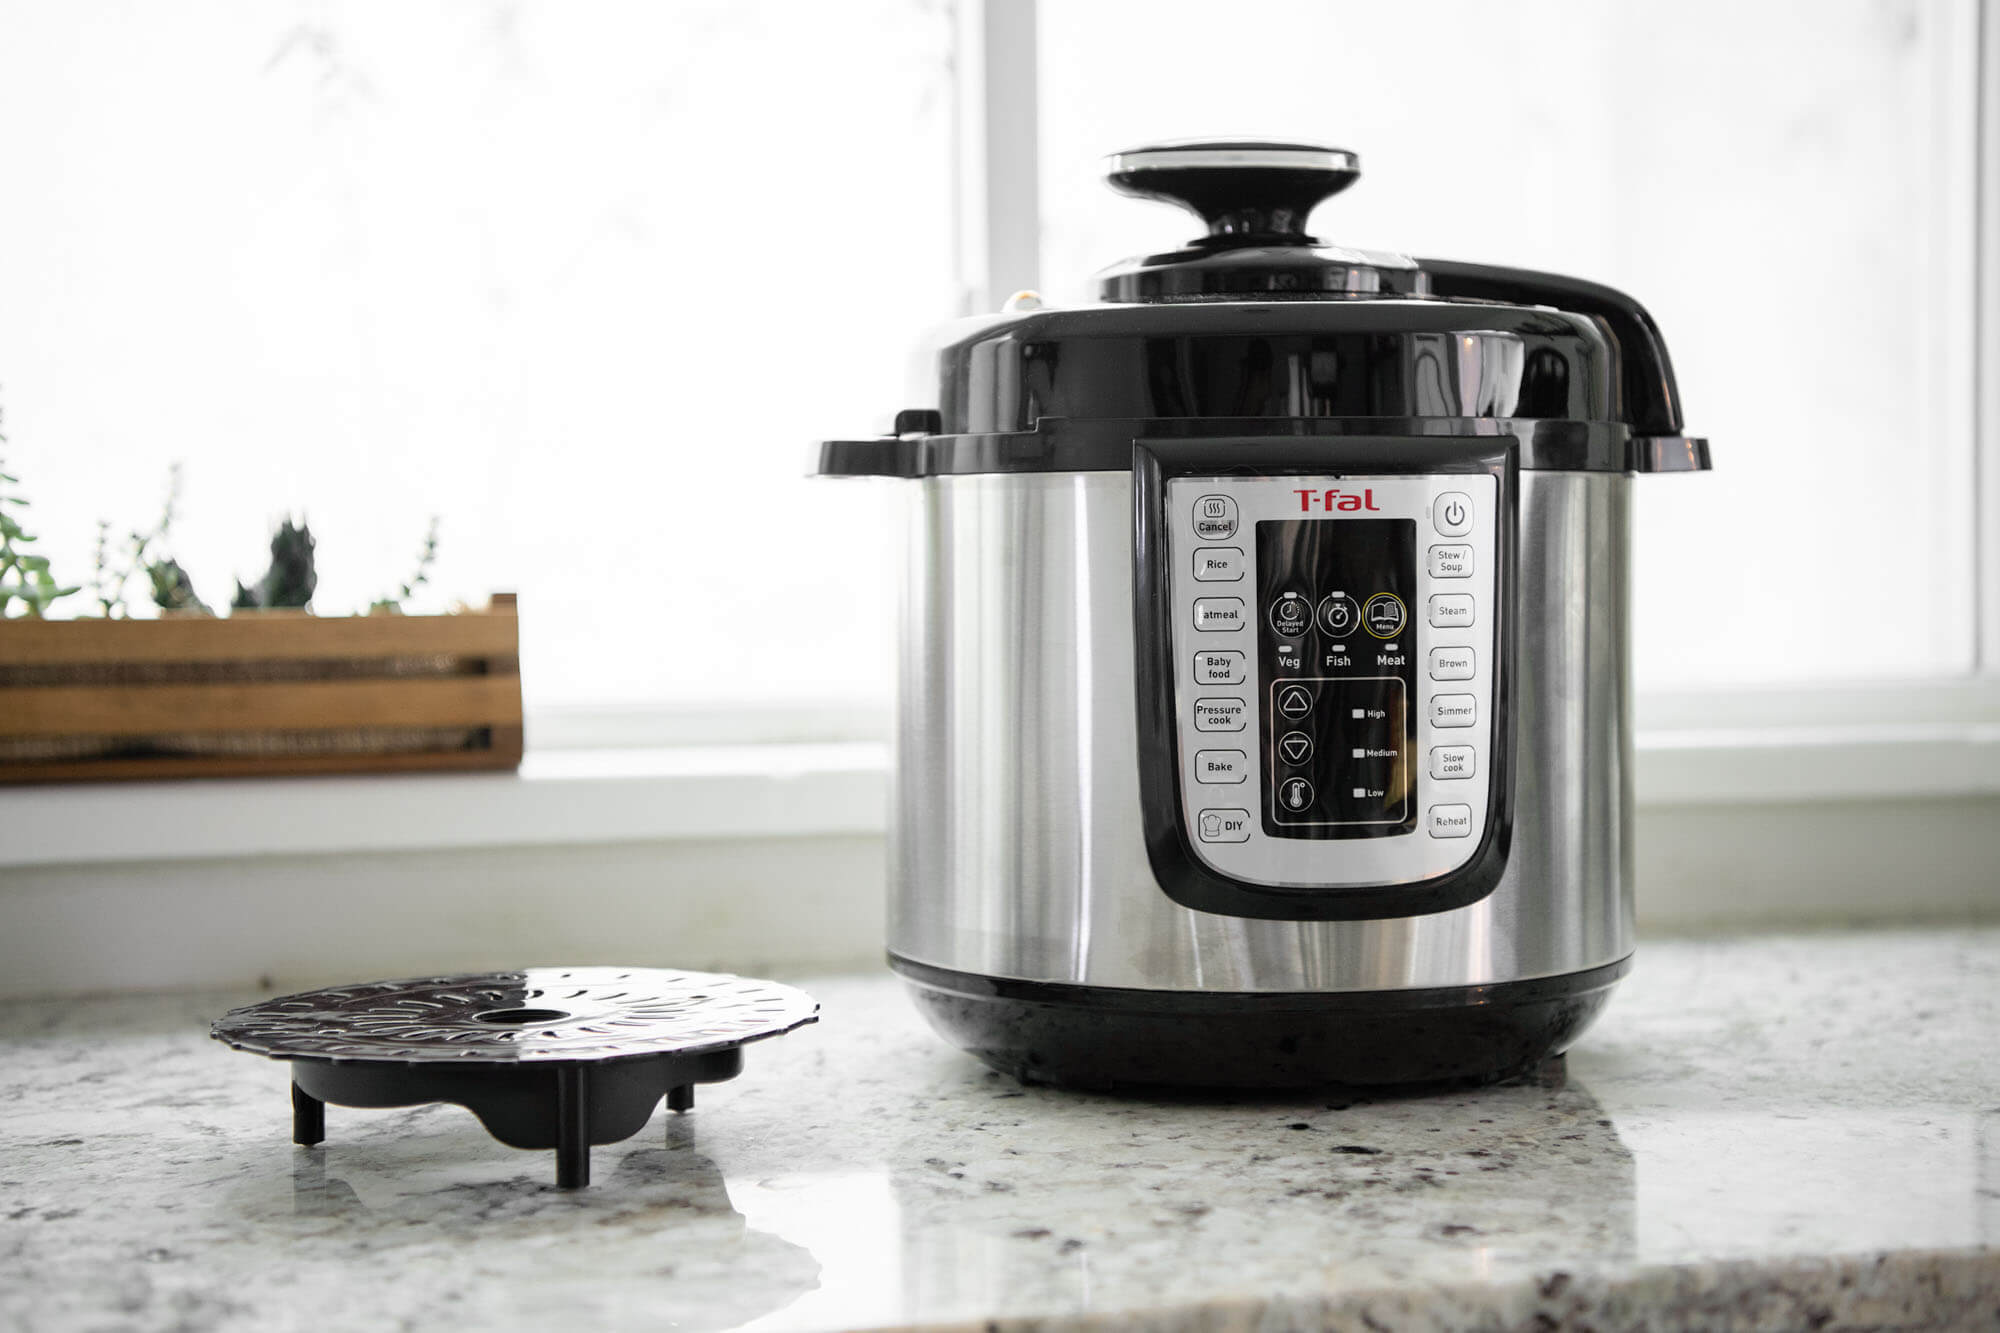 T Fal Pressure Cooker (Compare to Instant Pot) - Cookers & Steamers -  Salina, Kansas